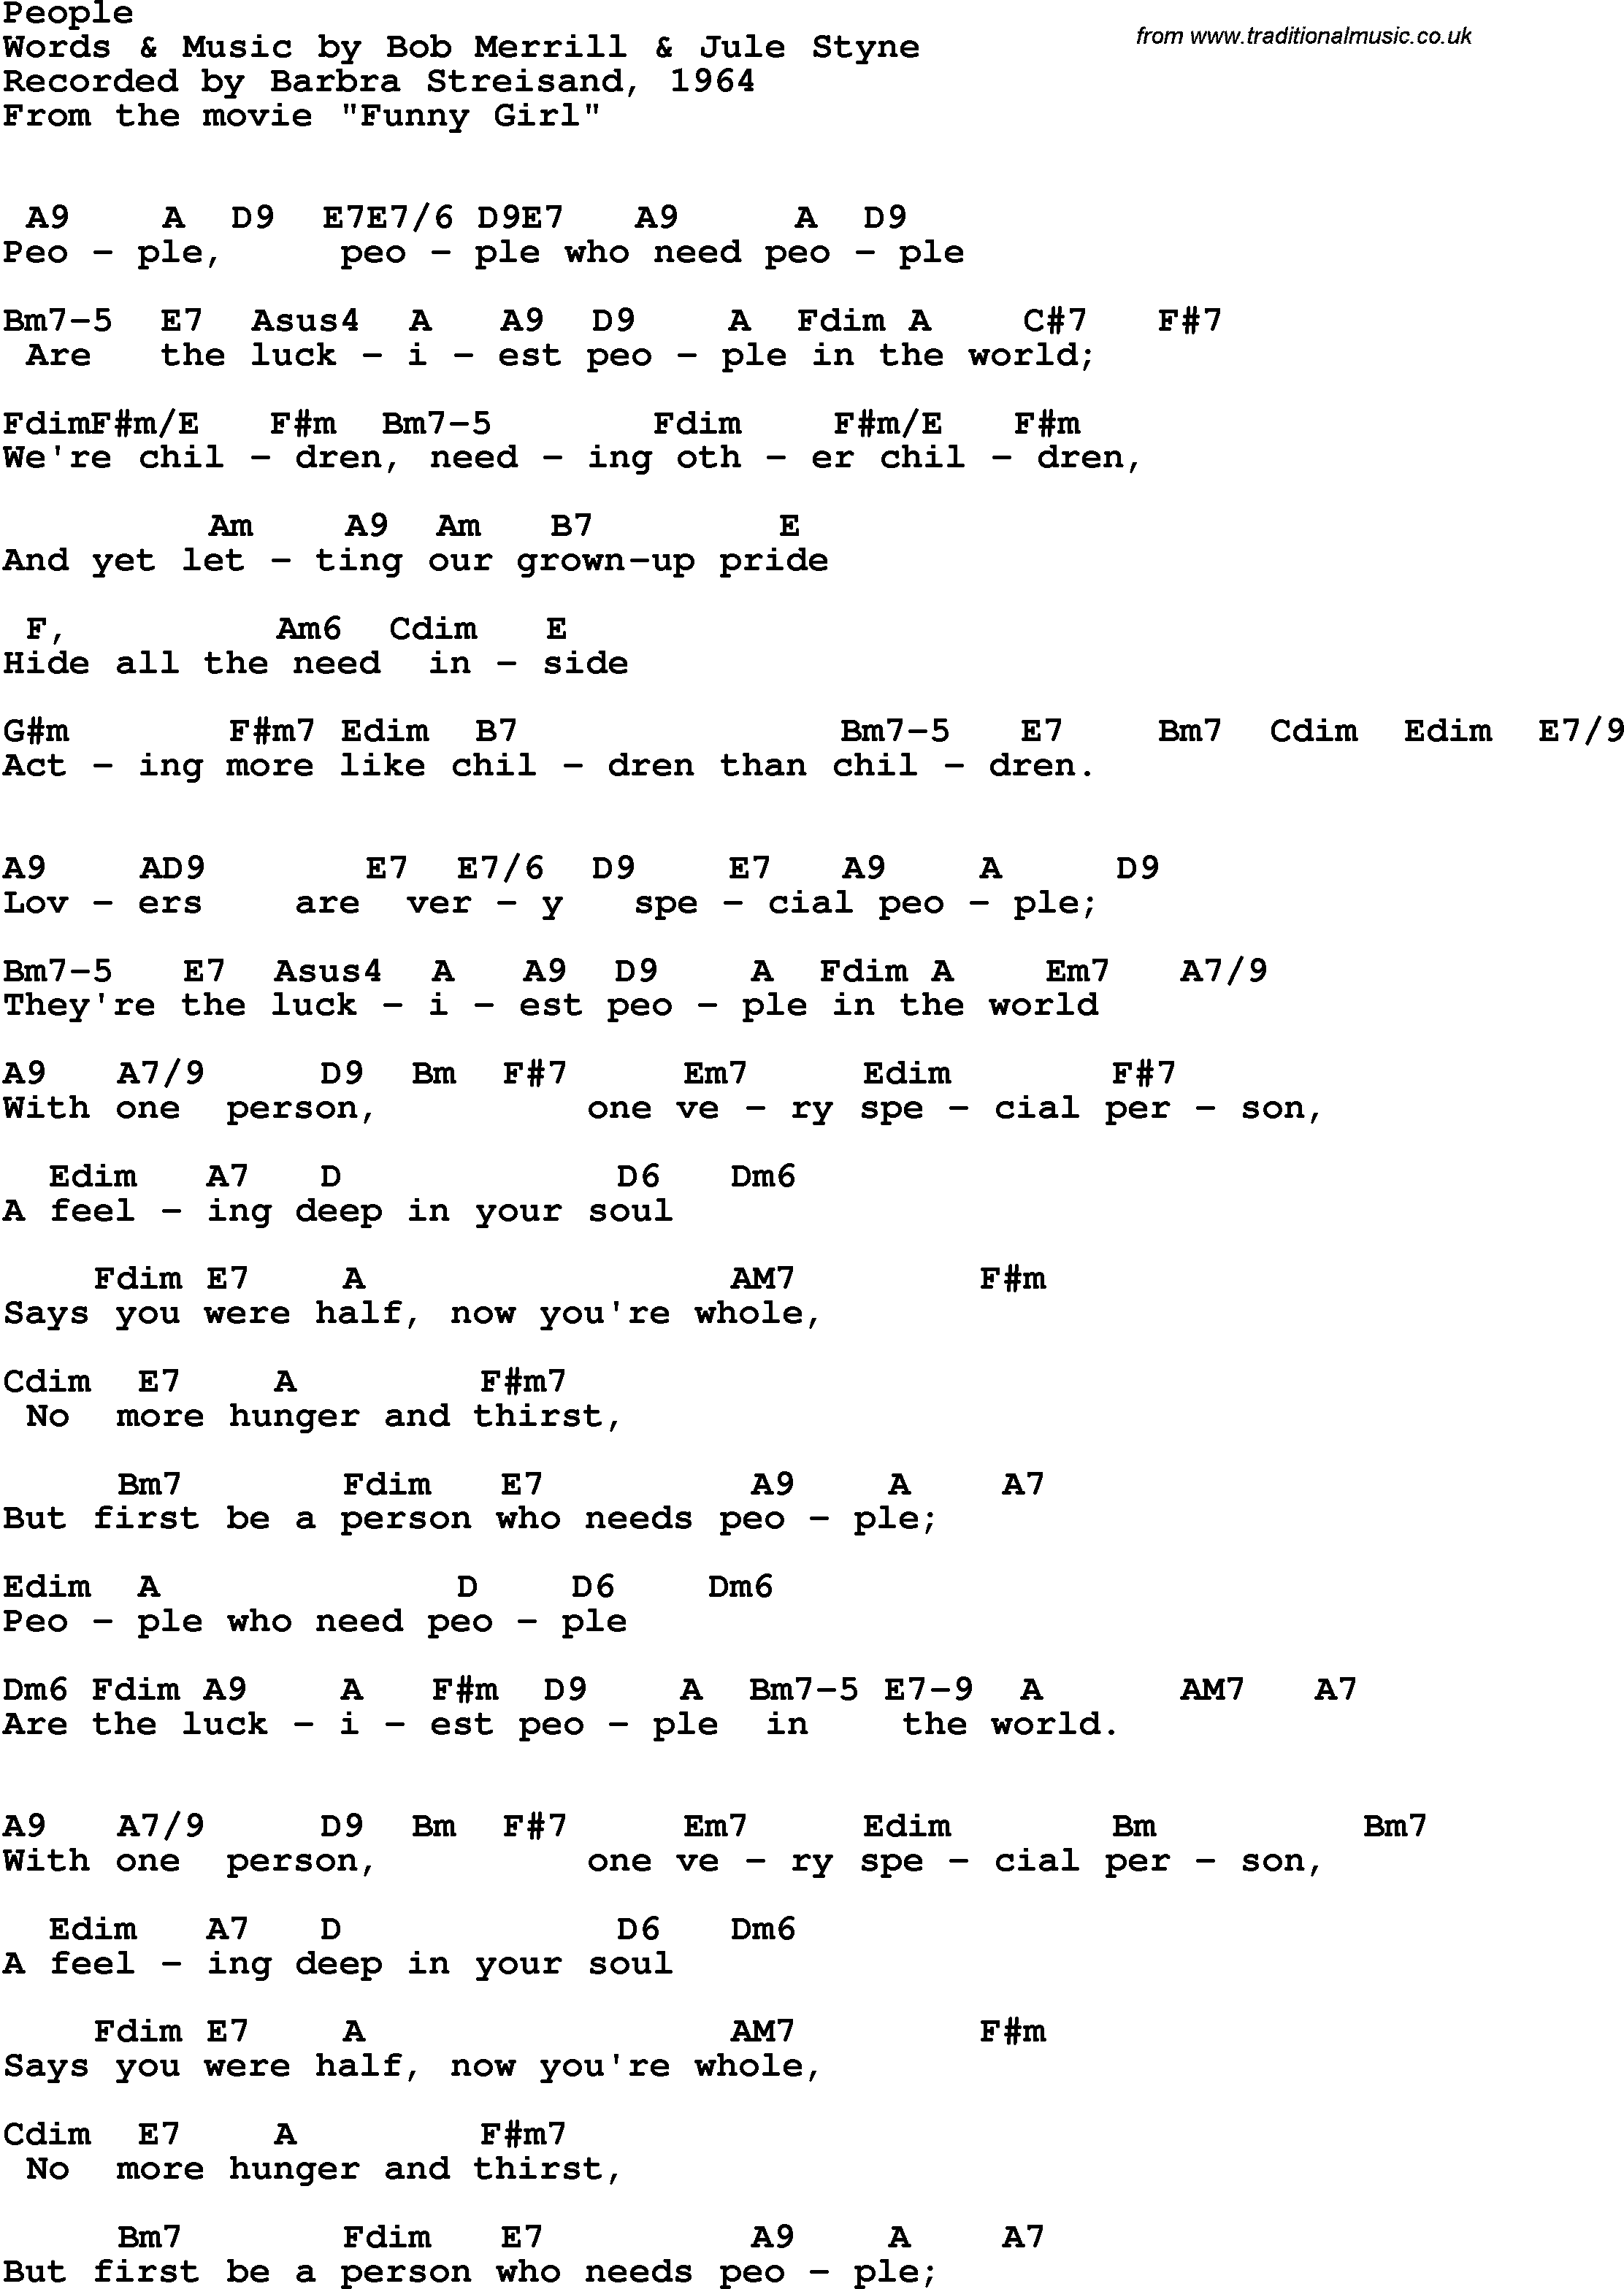 Song Lyrics with guitar chords for People - Barbra Streisand,  1964